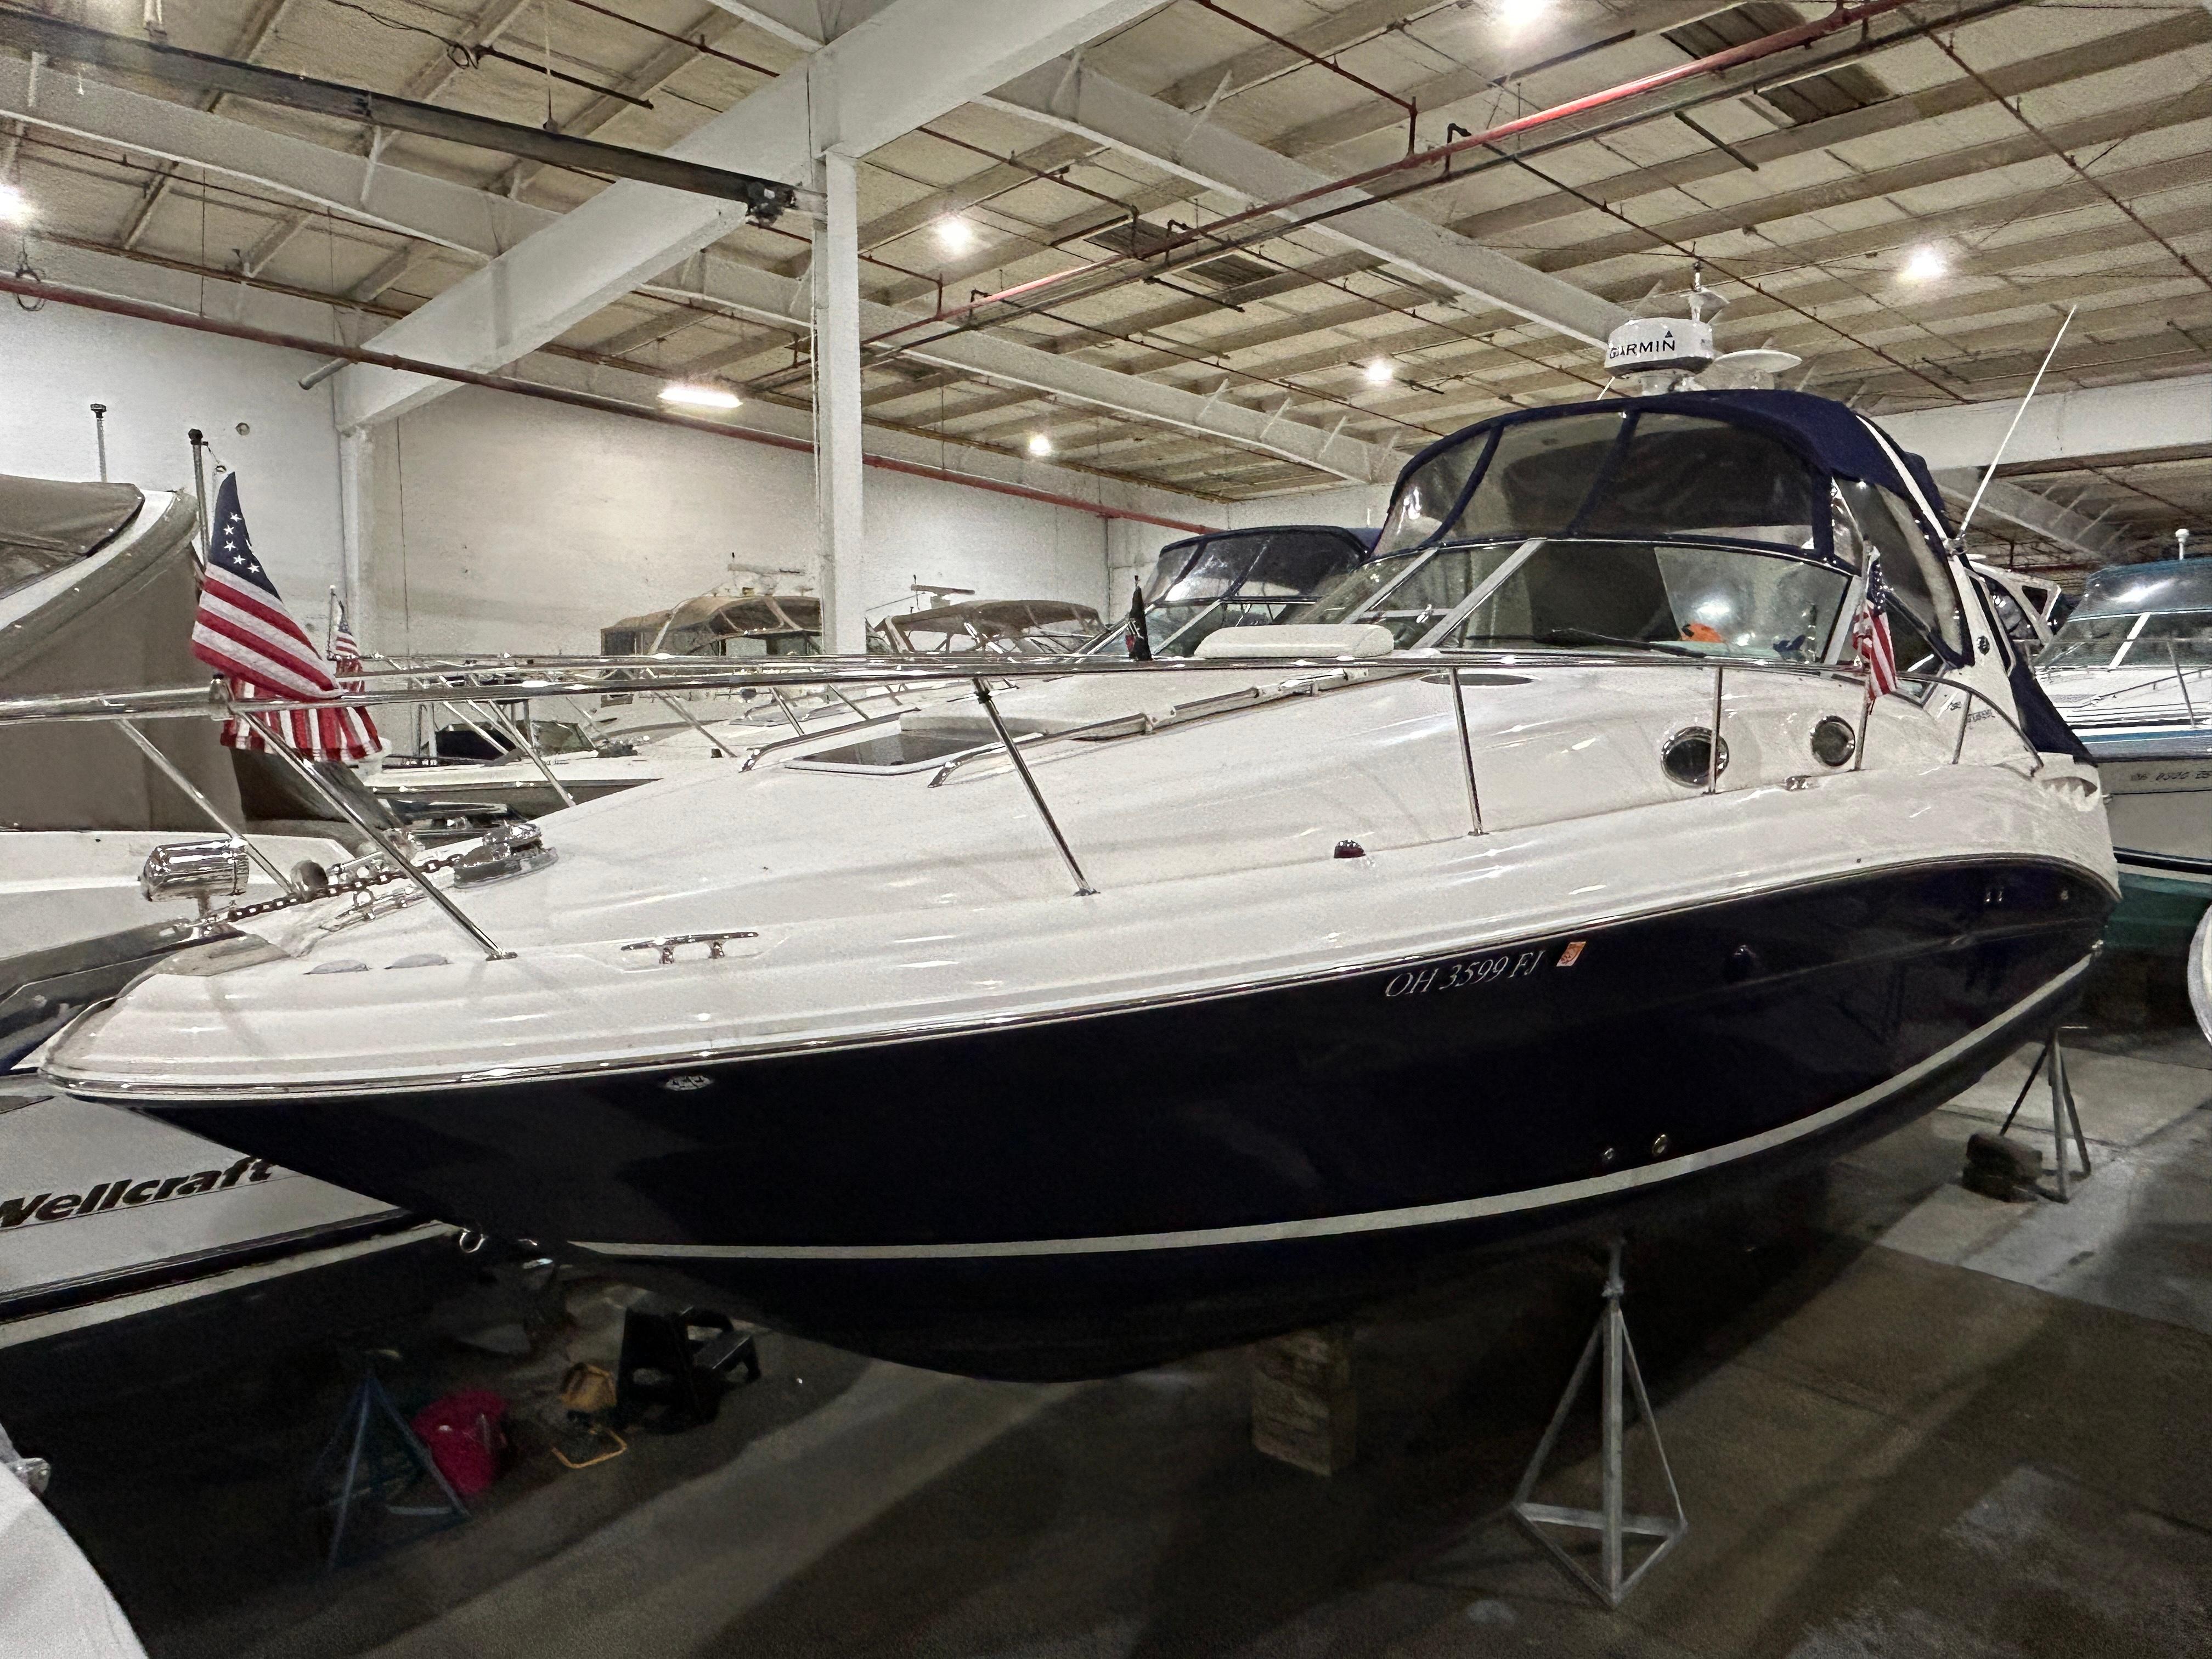 2006 Sea Ray 320 Sundancer for sale by Lucas Sochacki at Great Lakes Boats & Brokerage and Parma Marine 440-915-8995